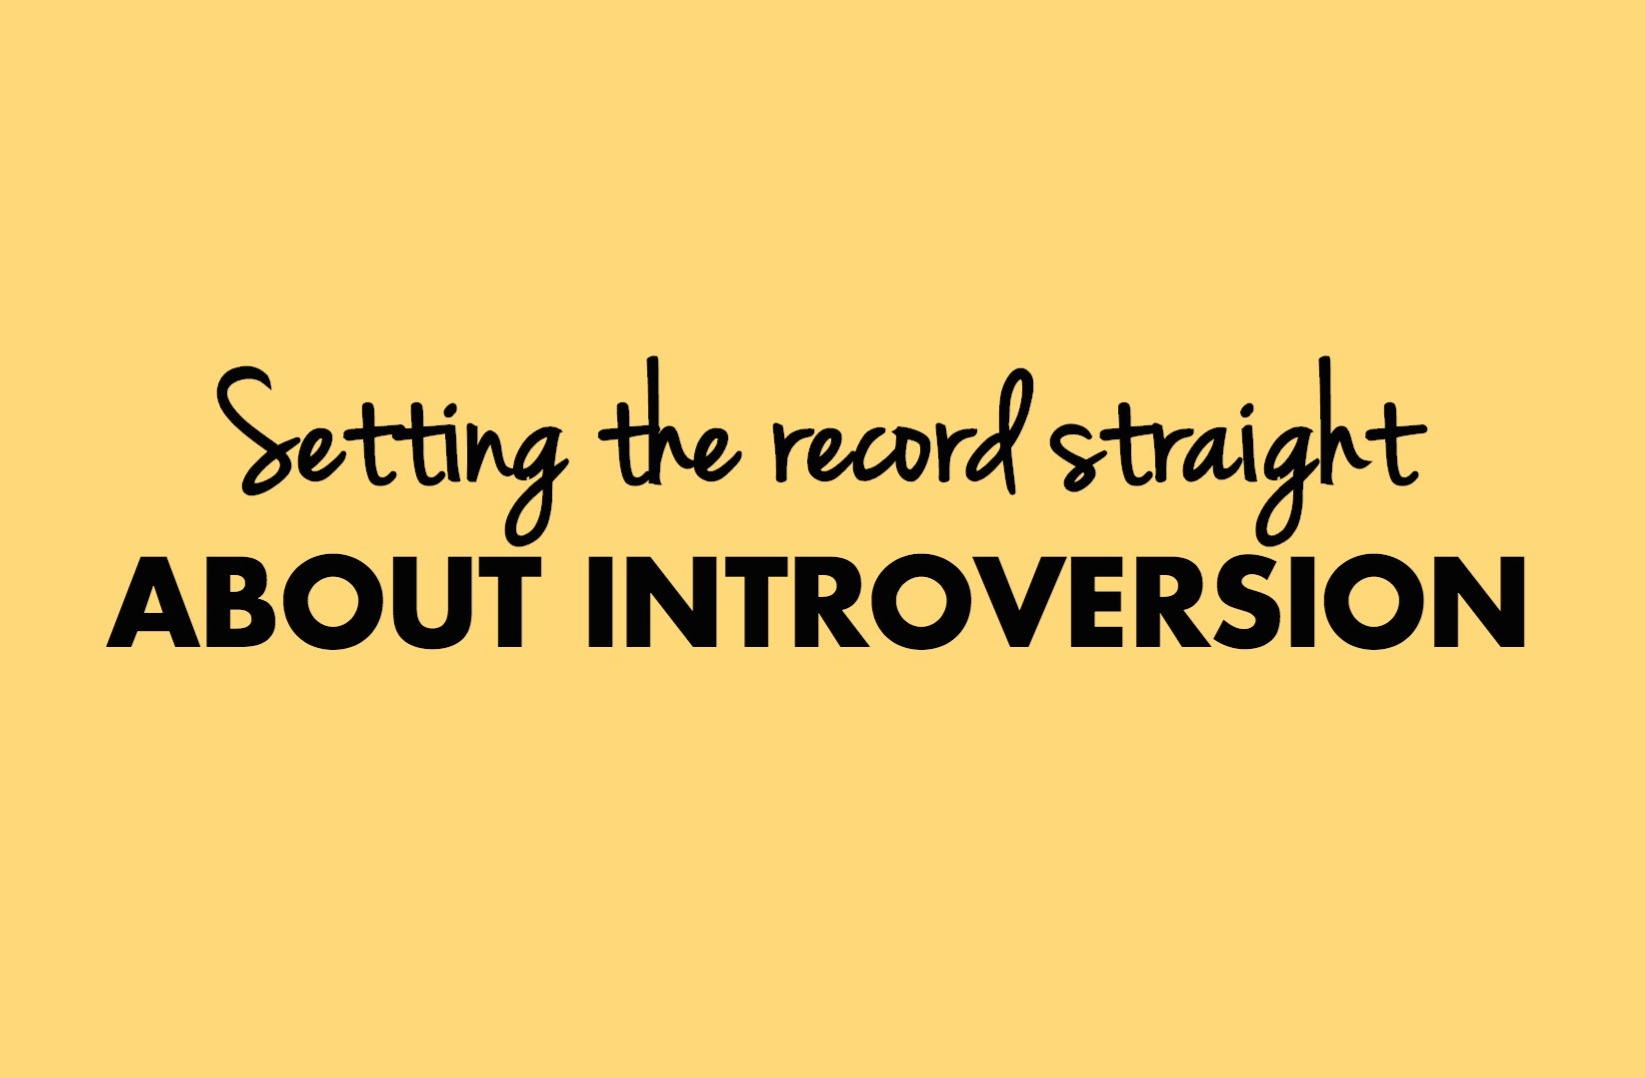 Setting the record straight about introversion